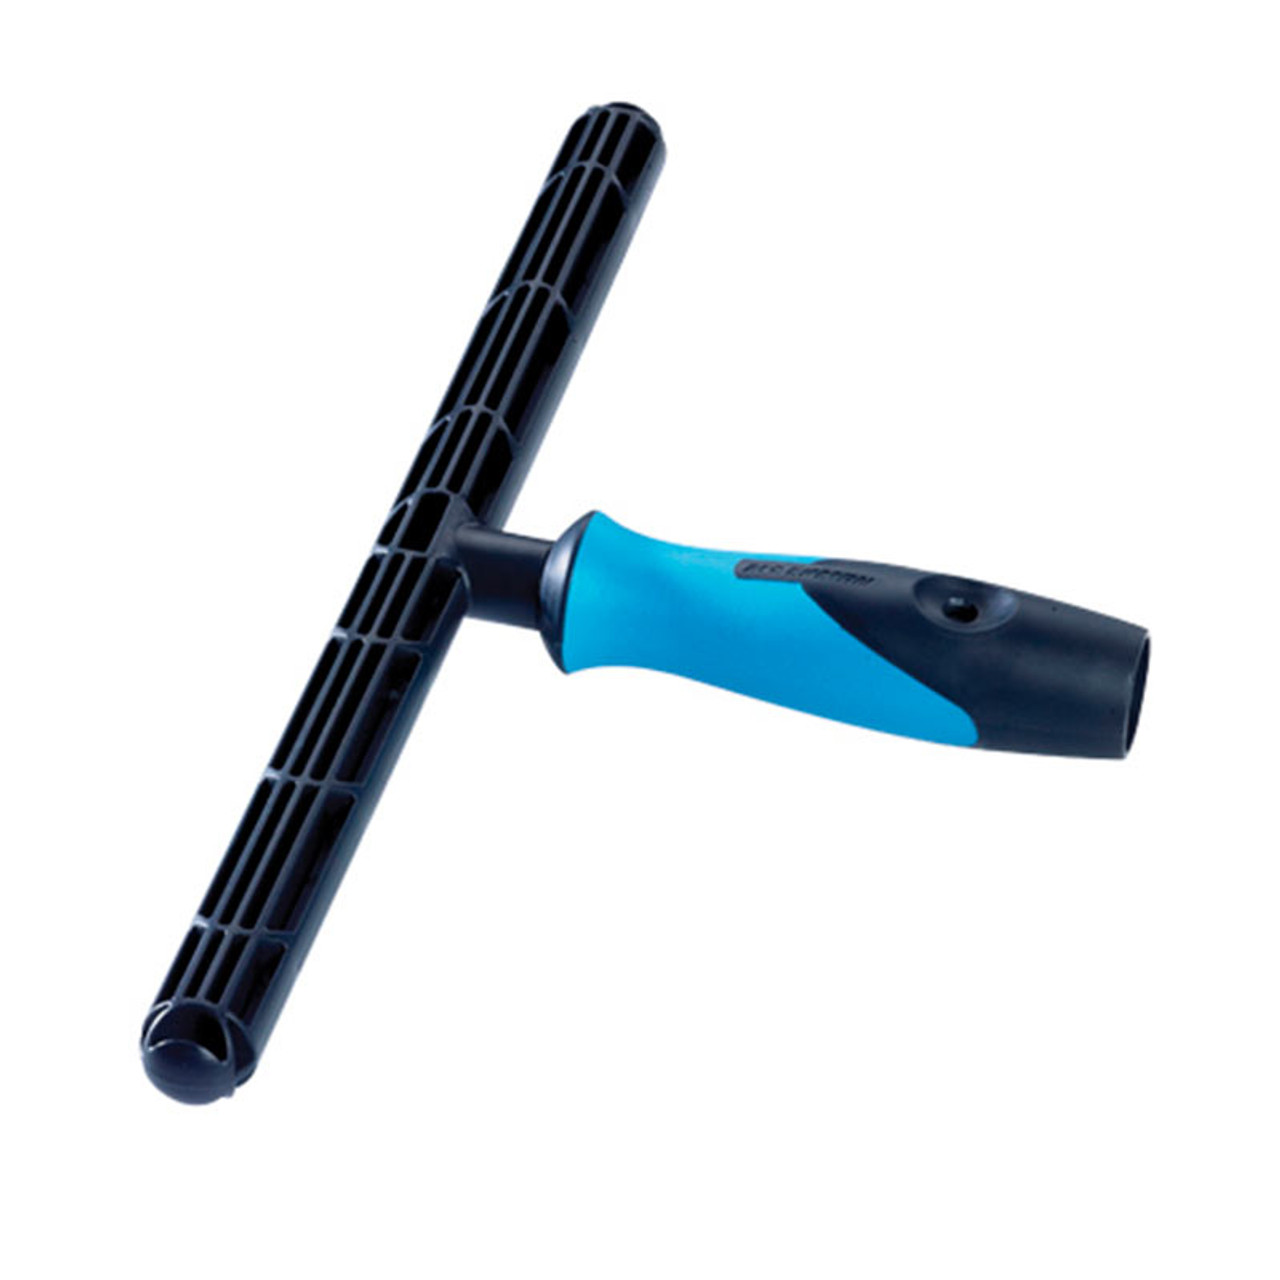 Premium Photo  Window cleaning tools and cleaning agent are